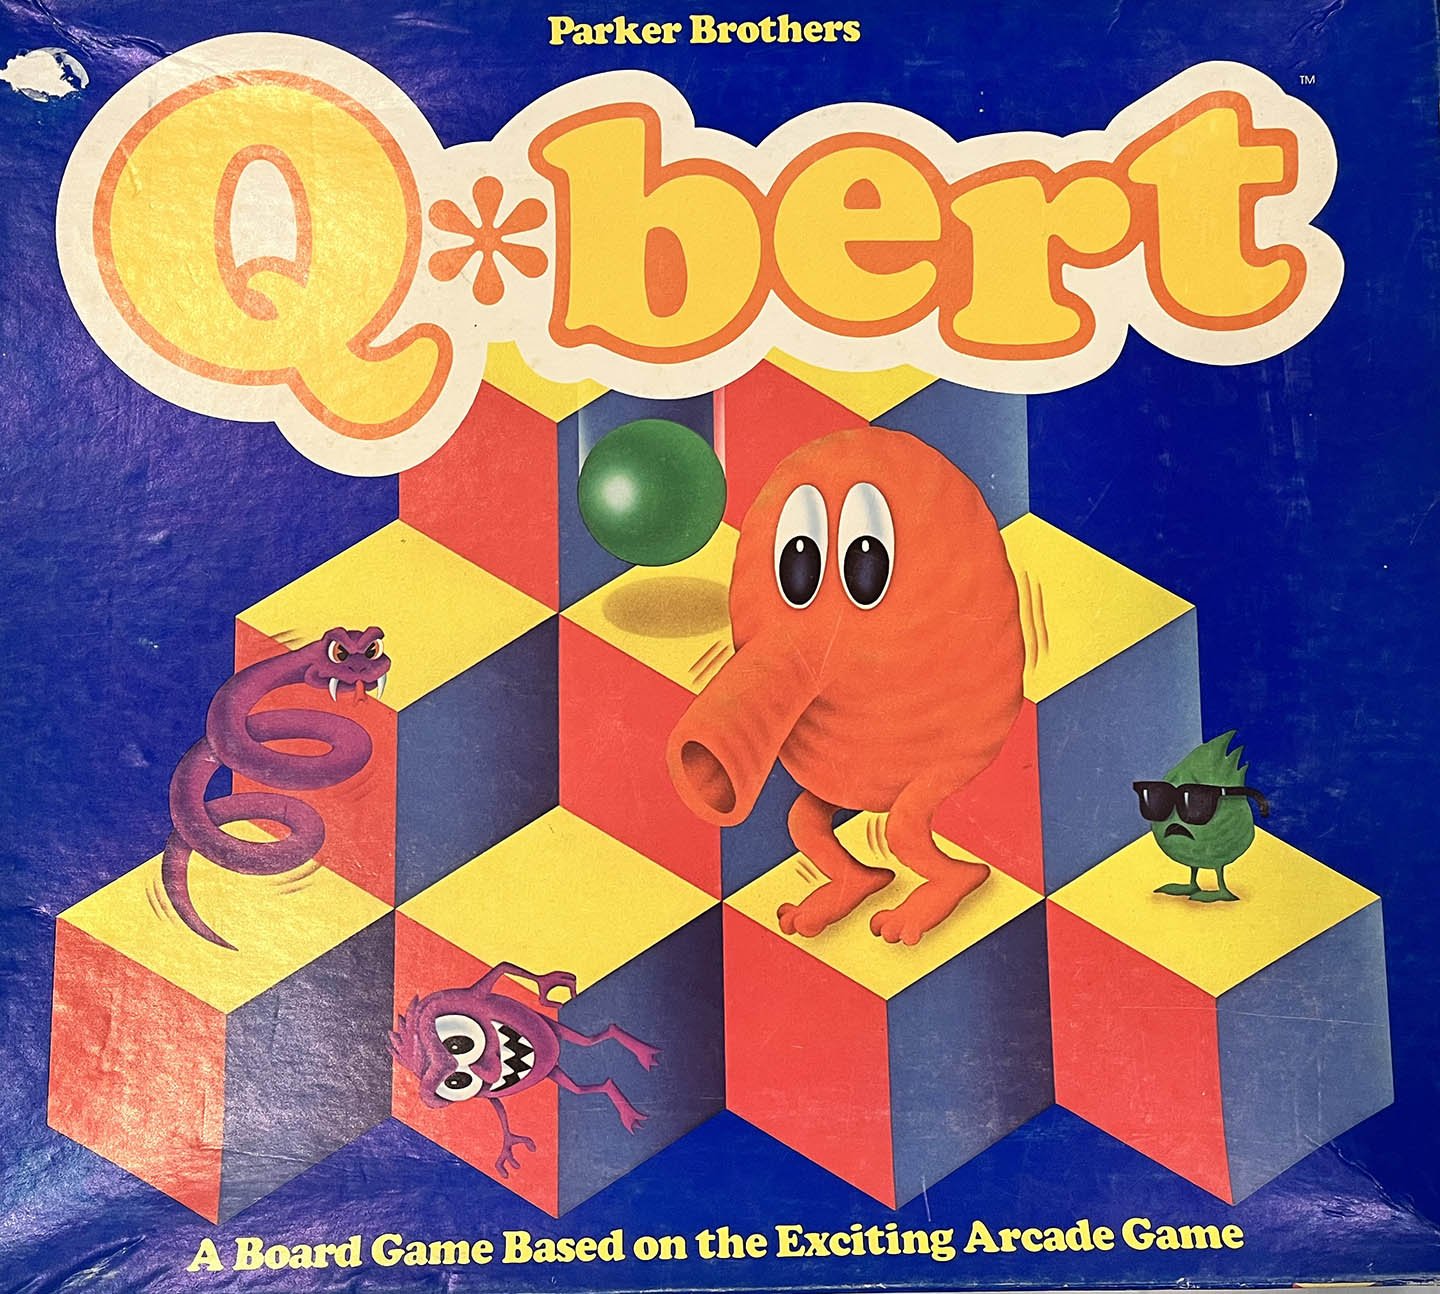 Q*bert board game, Parker Brothers, 1983 